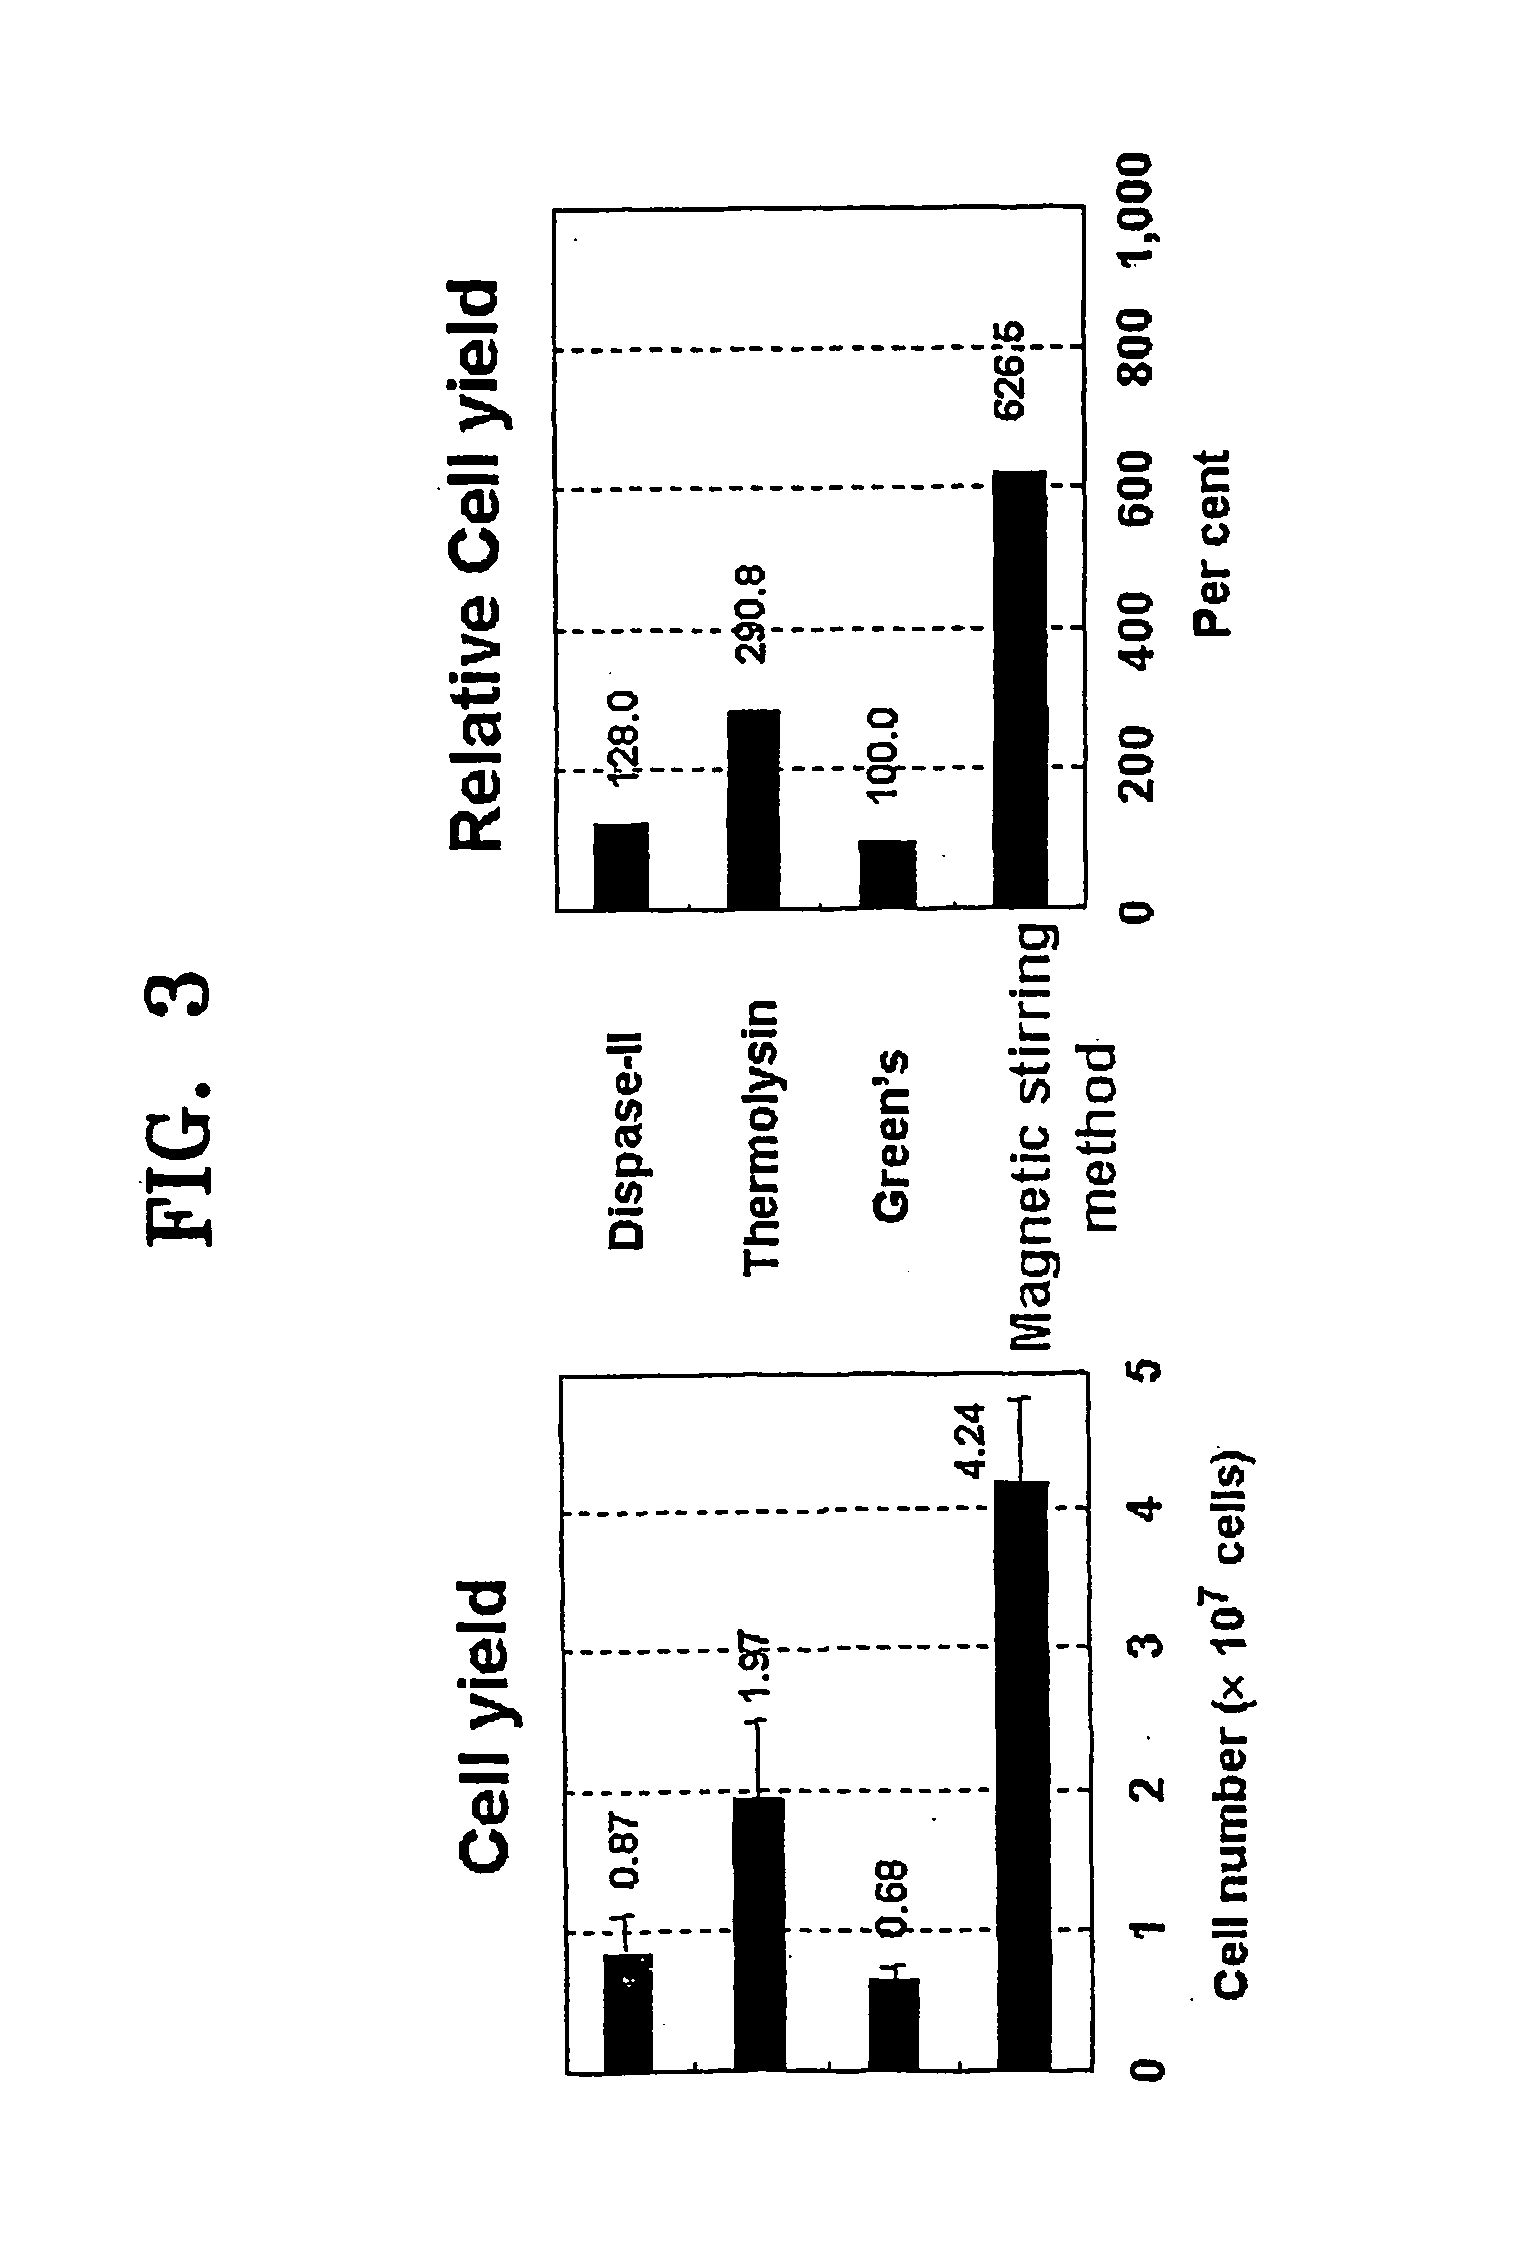 Method of isolating epithelial cells, method of preconditioning cells, and methods of preparing bioartificial skin and dermis with the epithelial cells or the preconditioned cells